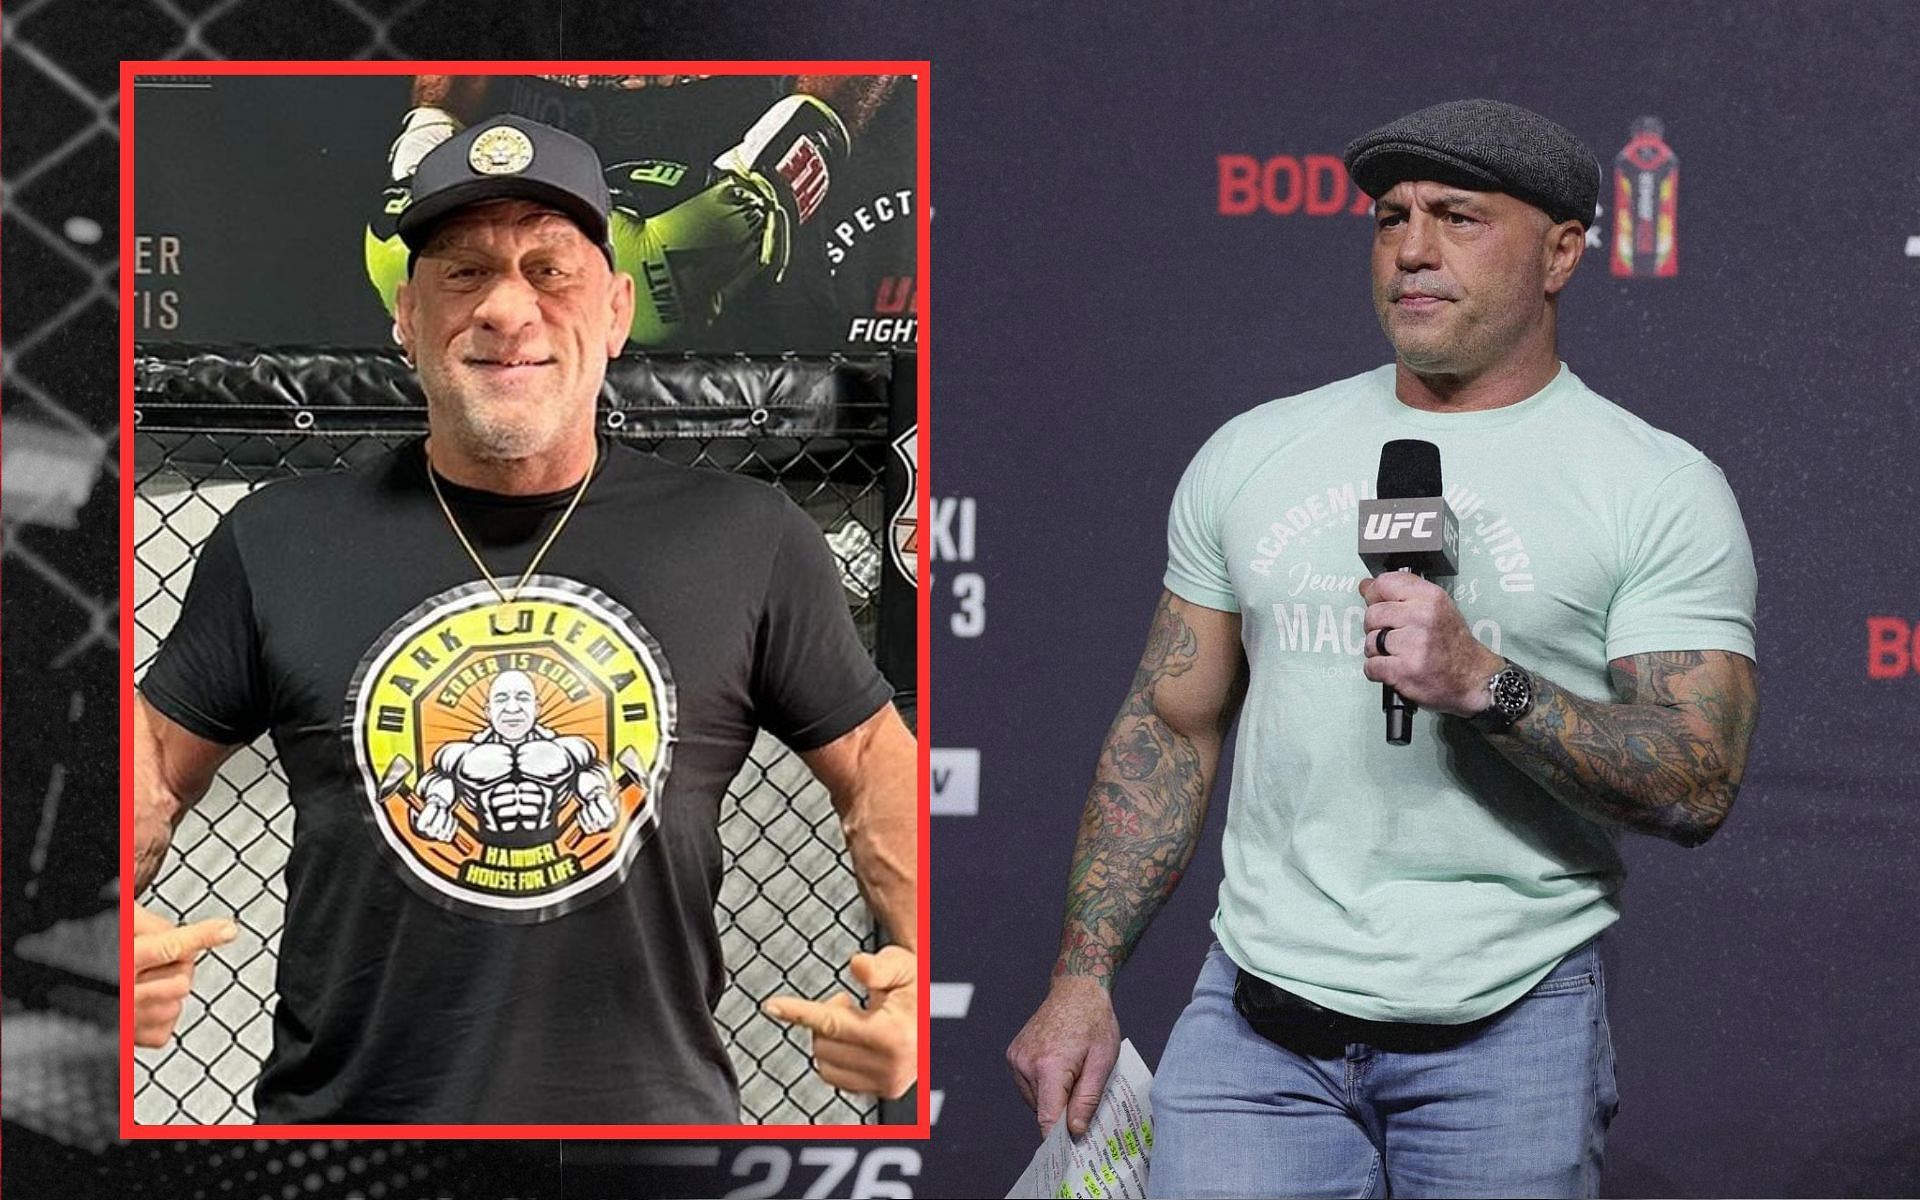 Mark Coleman (inset) opens up on his viral clip of shoving away Joe Rogan (right). [Image courtesy: @markcolemanufc on Instagram; Getty Images]